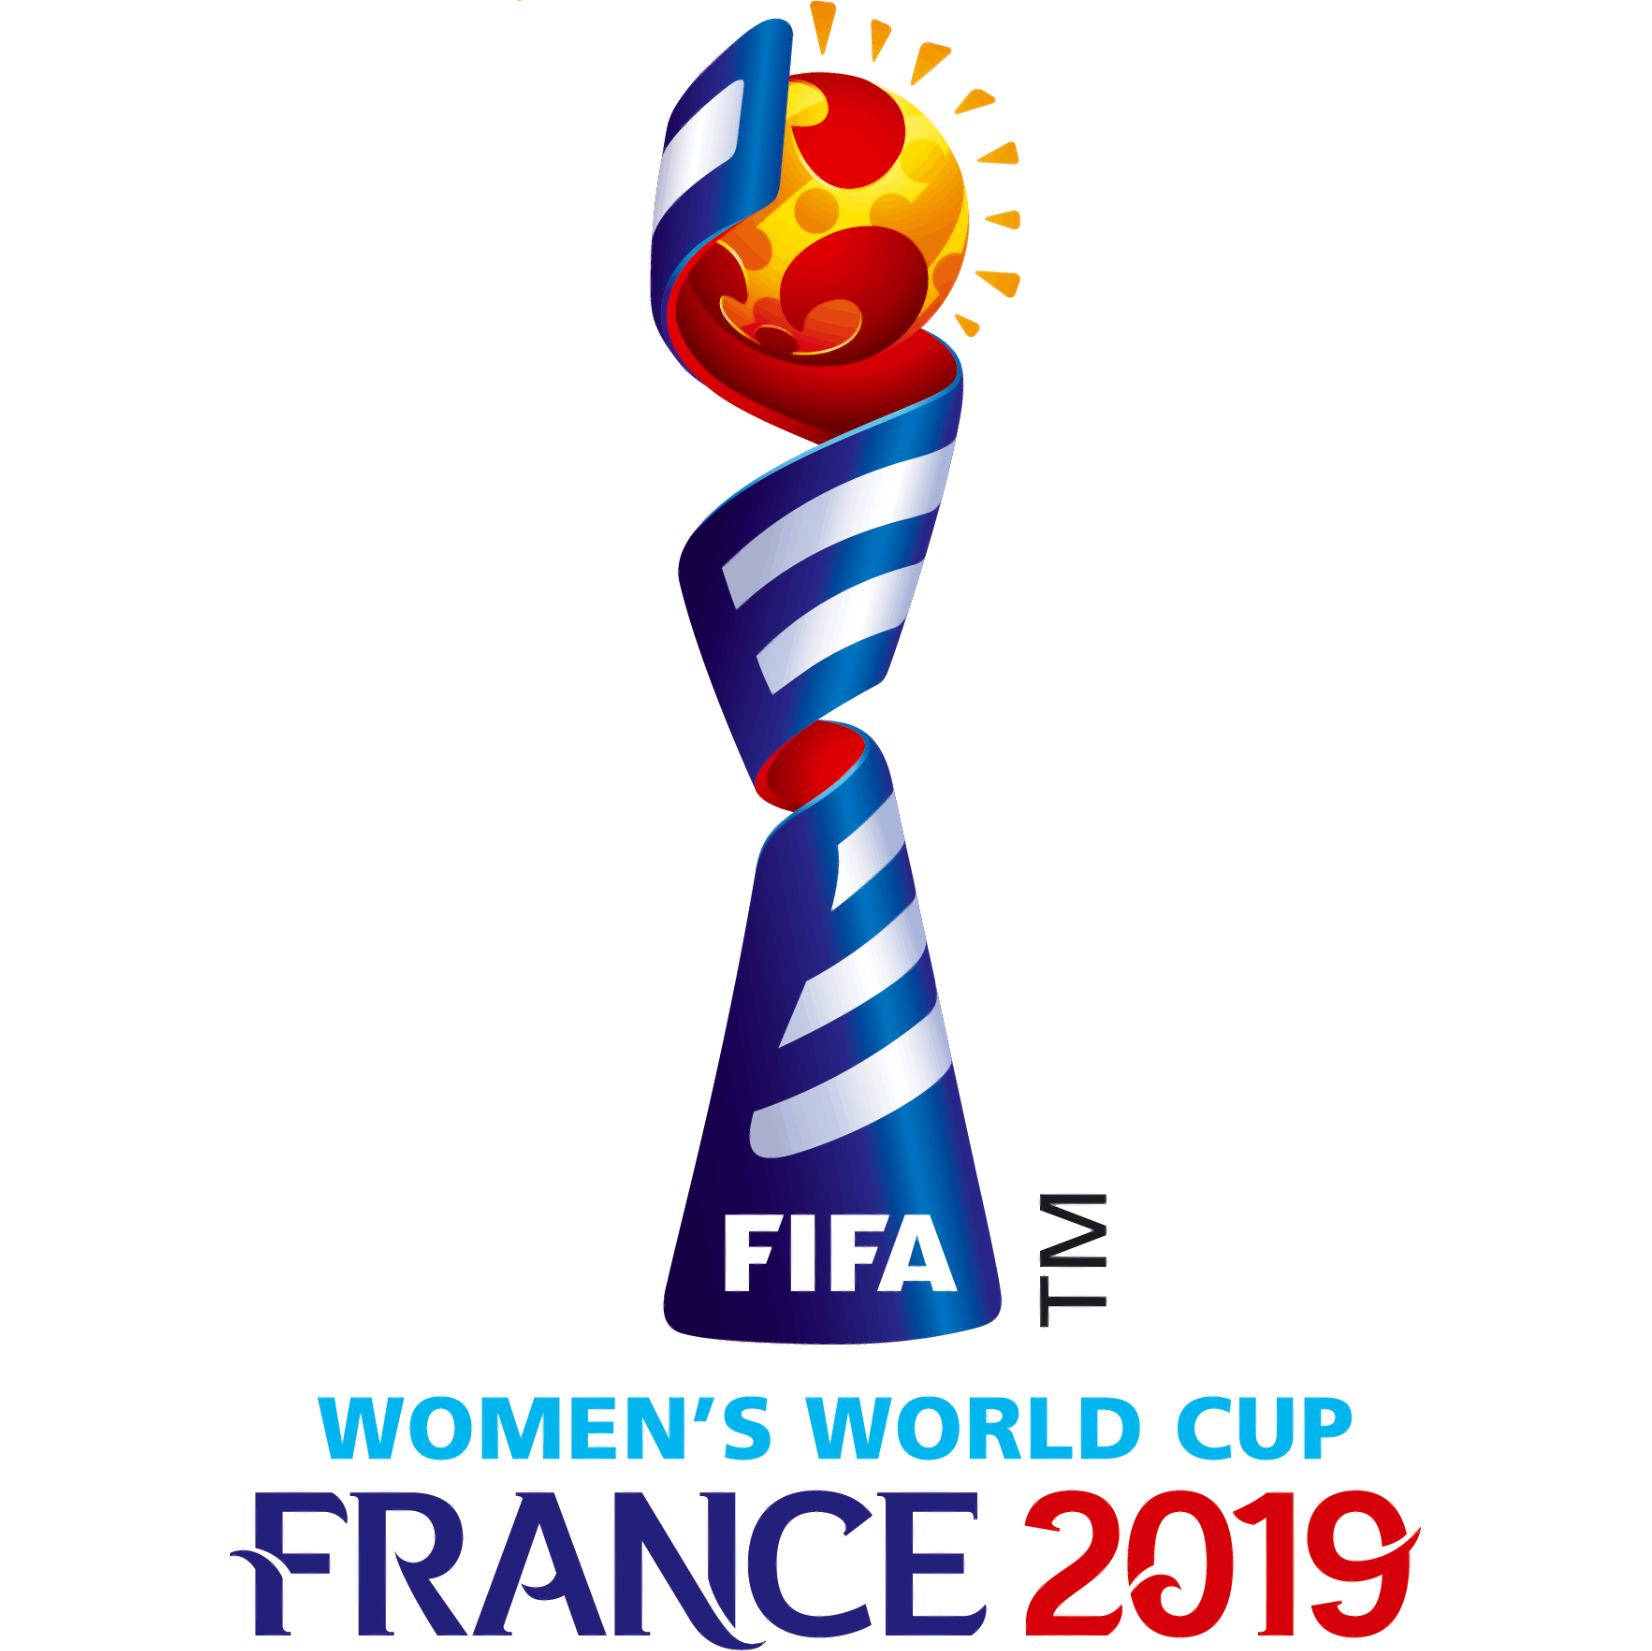 [NEWS] Women's World Cup 2019 Broke Grounds with familiar outcome